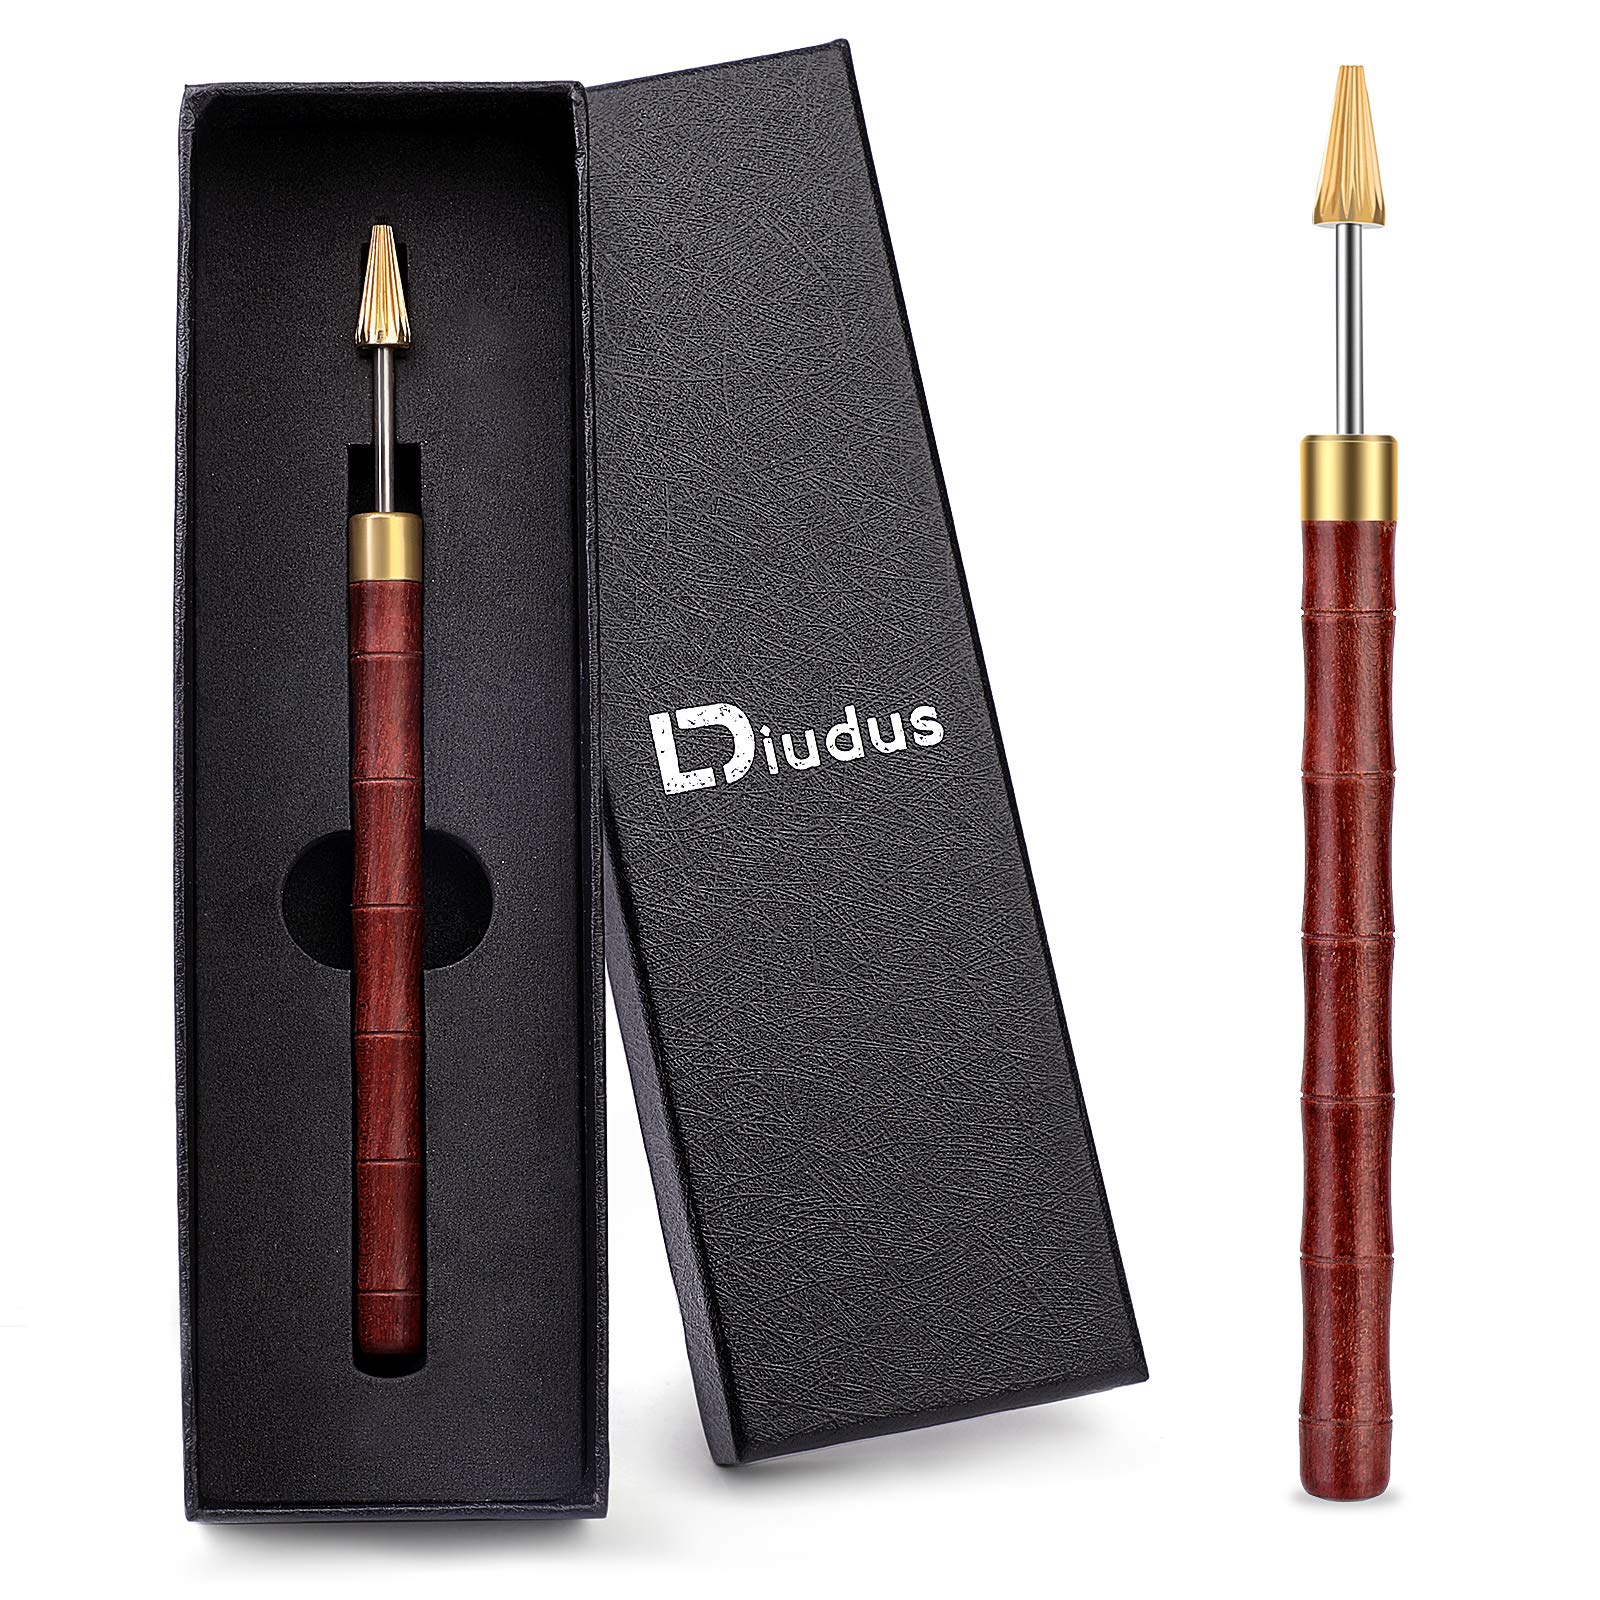 DIUDUS Leather Edge Dye Pen, Red Wood Handle Stainless Steel Top Edge Dye Roller Oil Pen Belt Finisher Leather DIY Craft